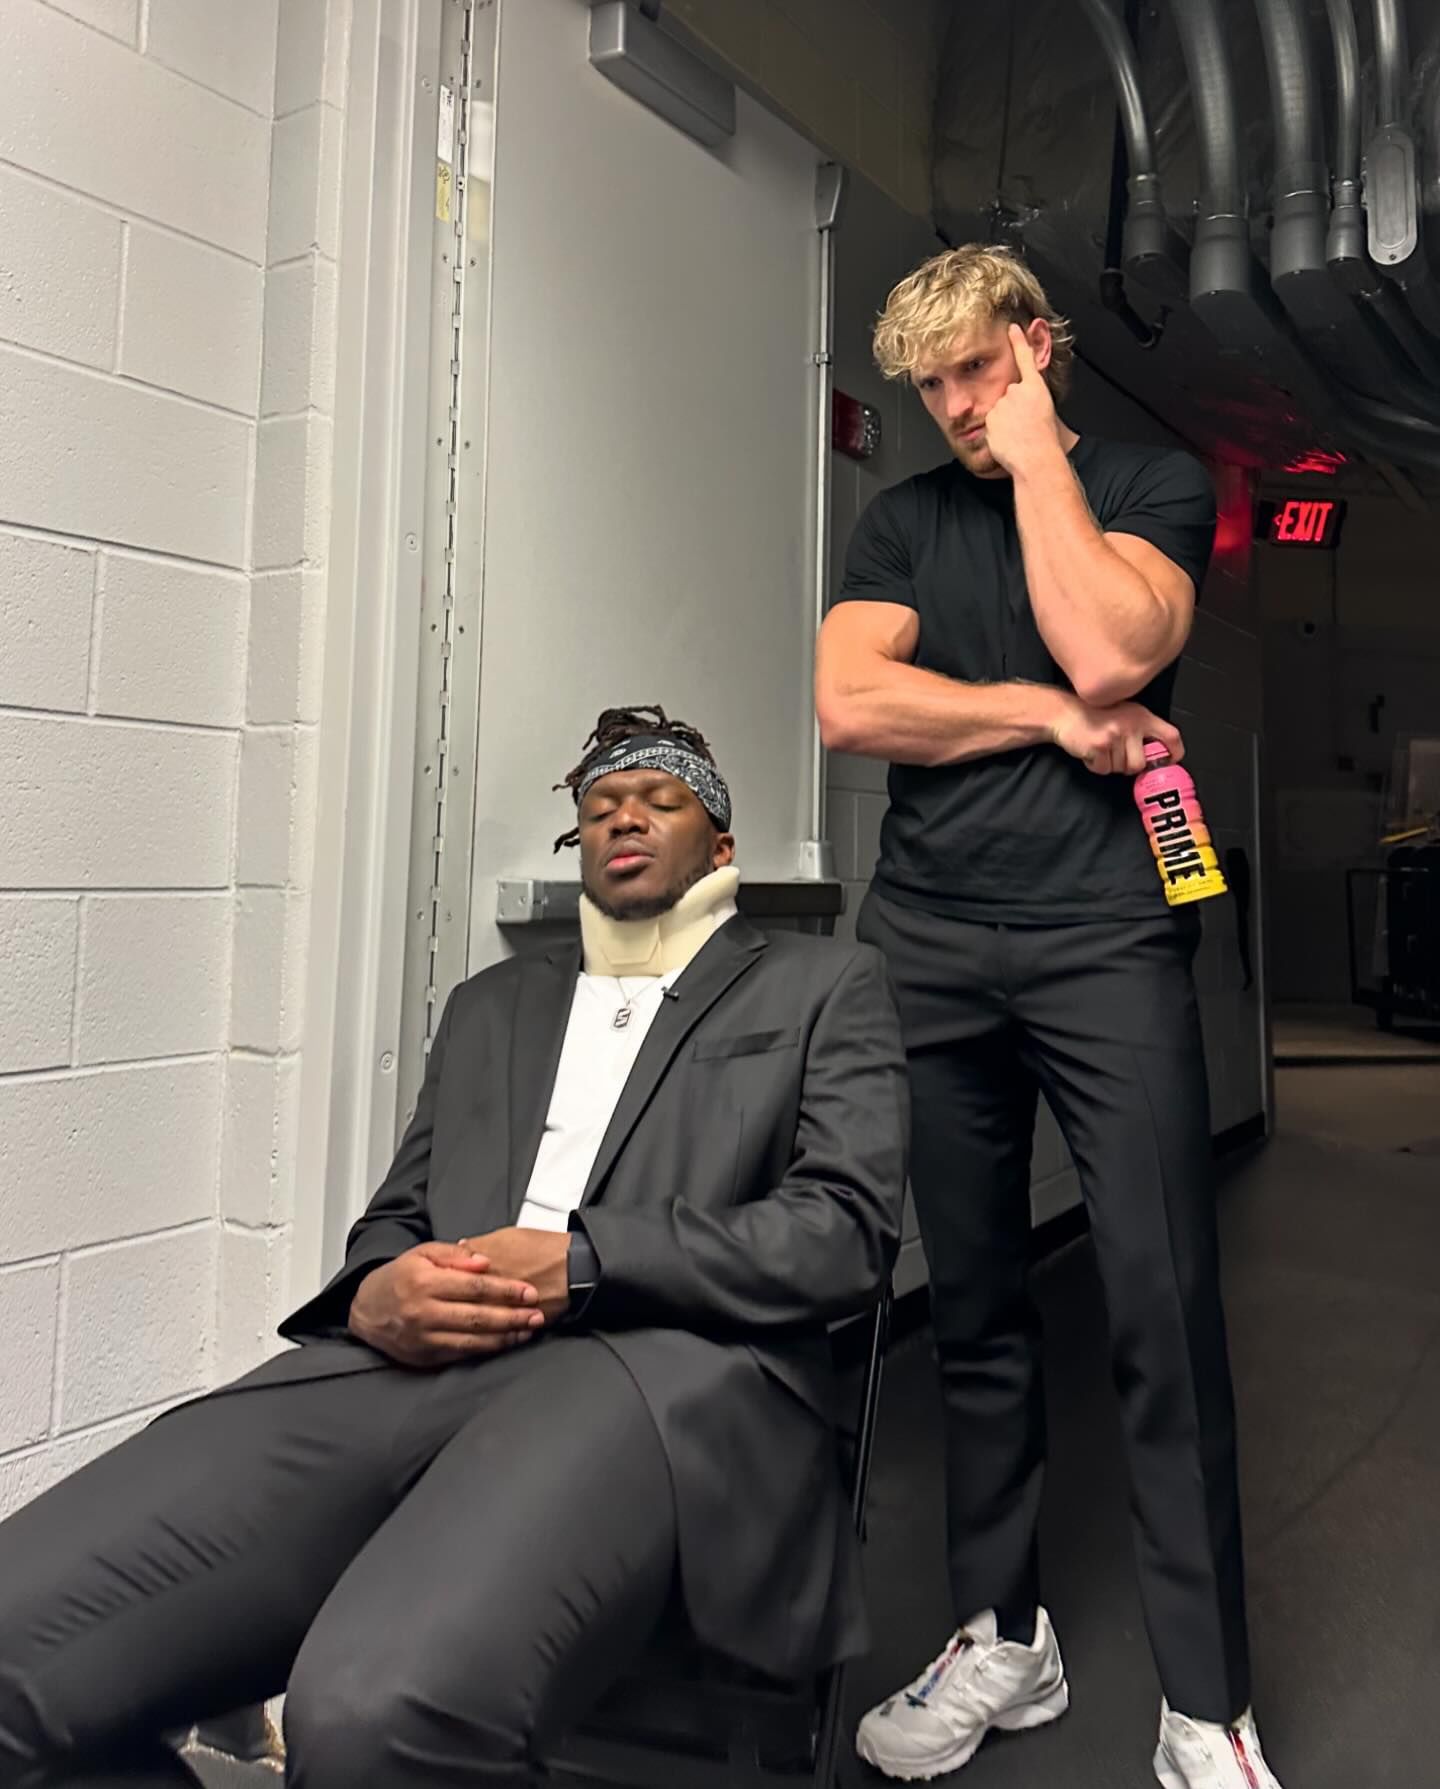 KSI complained about his role in WWE after SmackDown